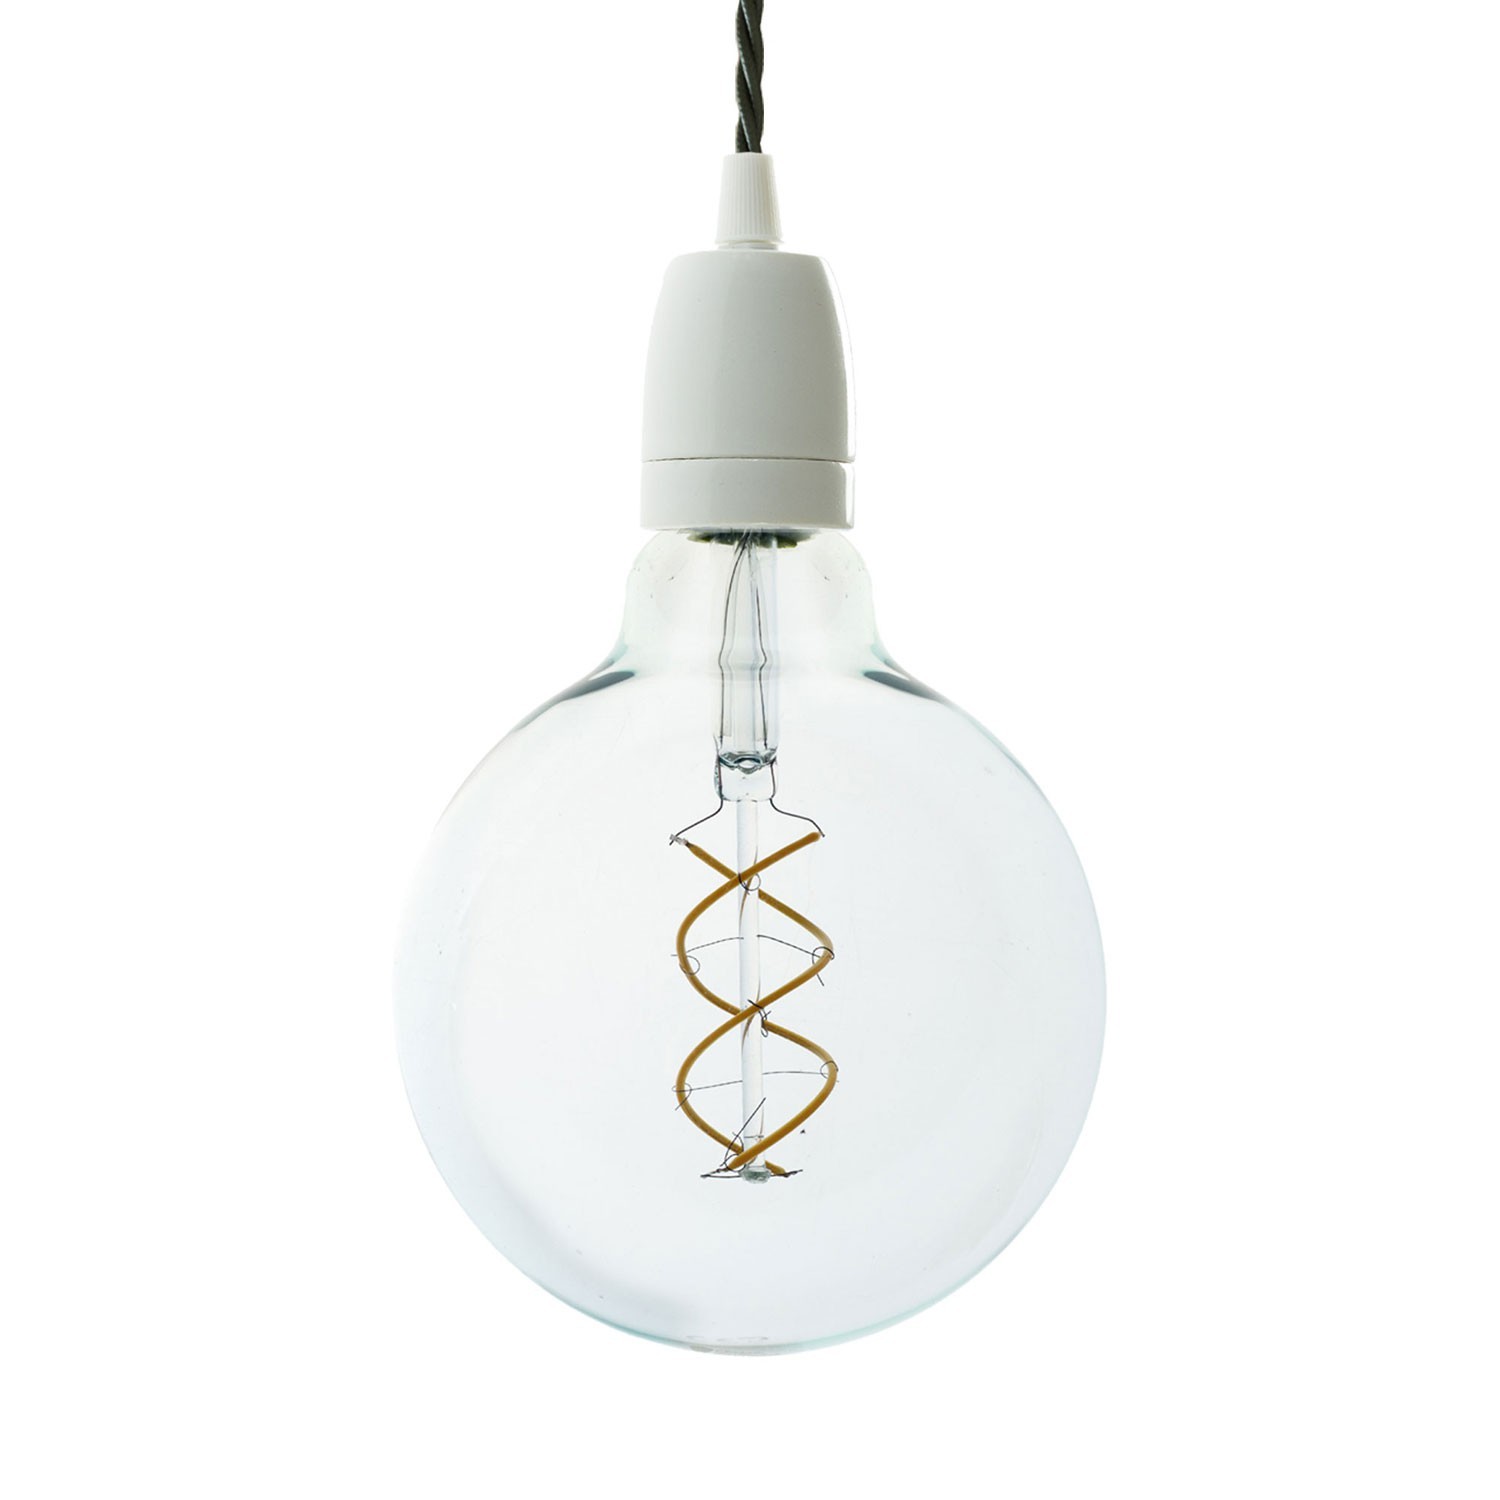 Pendant lamp with twisted textile cable and white porcelain details - Made in Italy